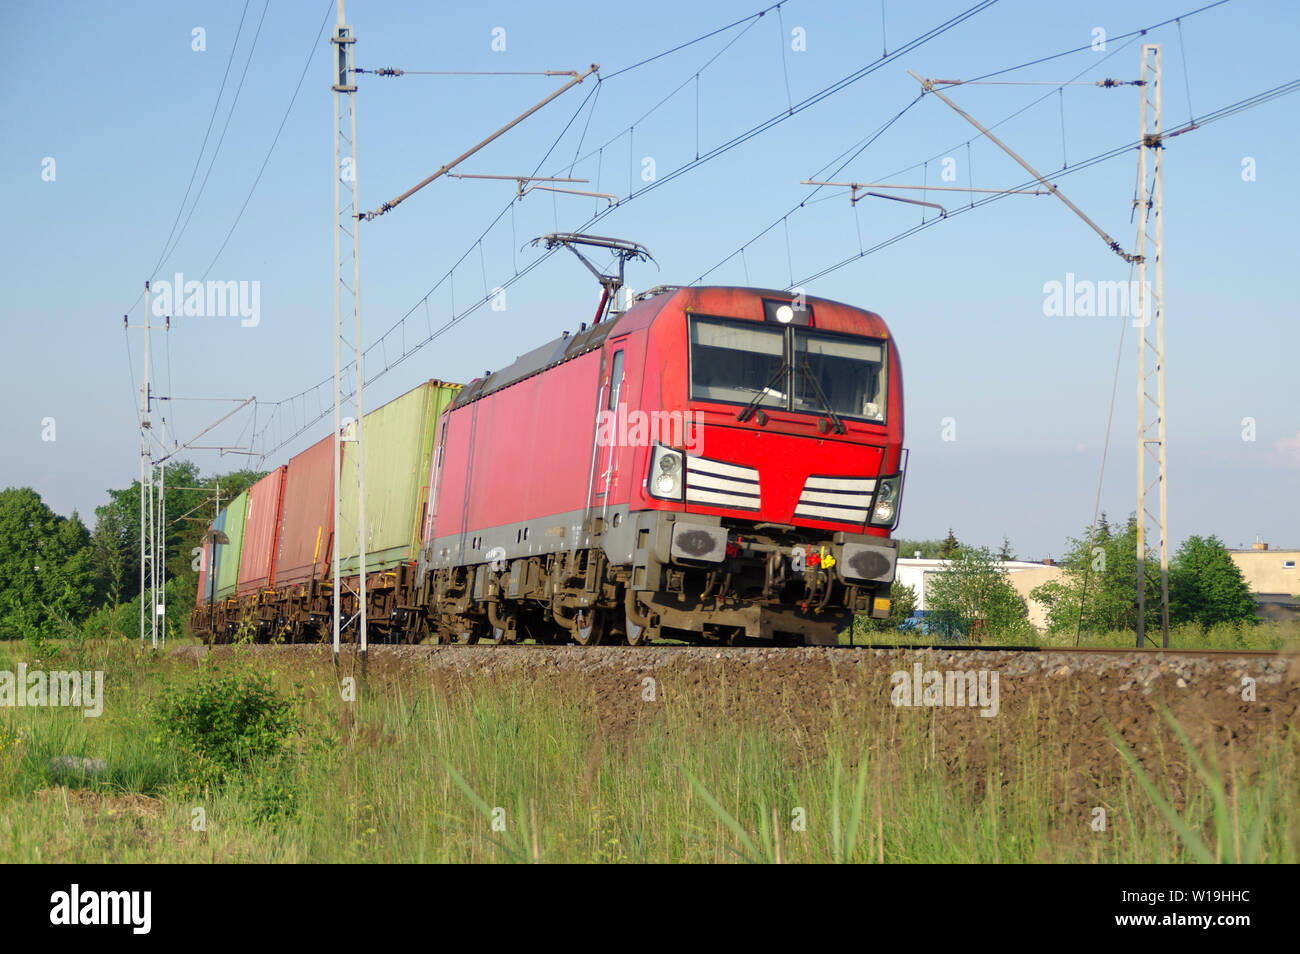 Fast electric train on tracks. Freight railway transport in Europe. Stock Photo